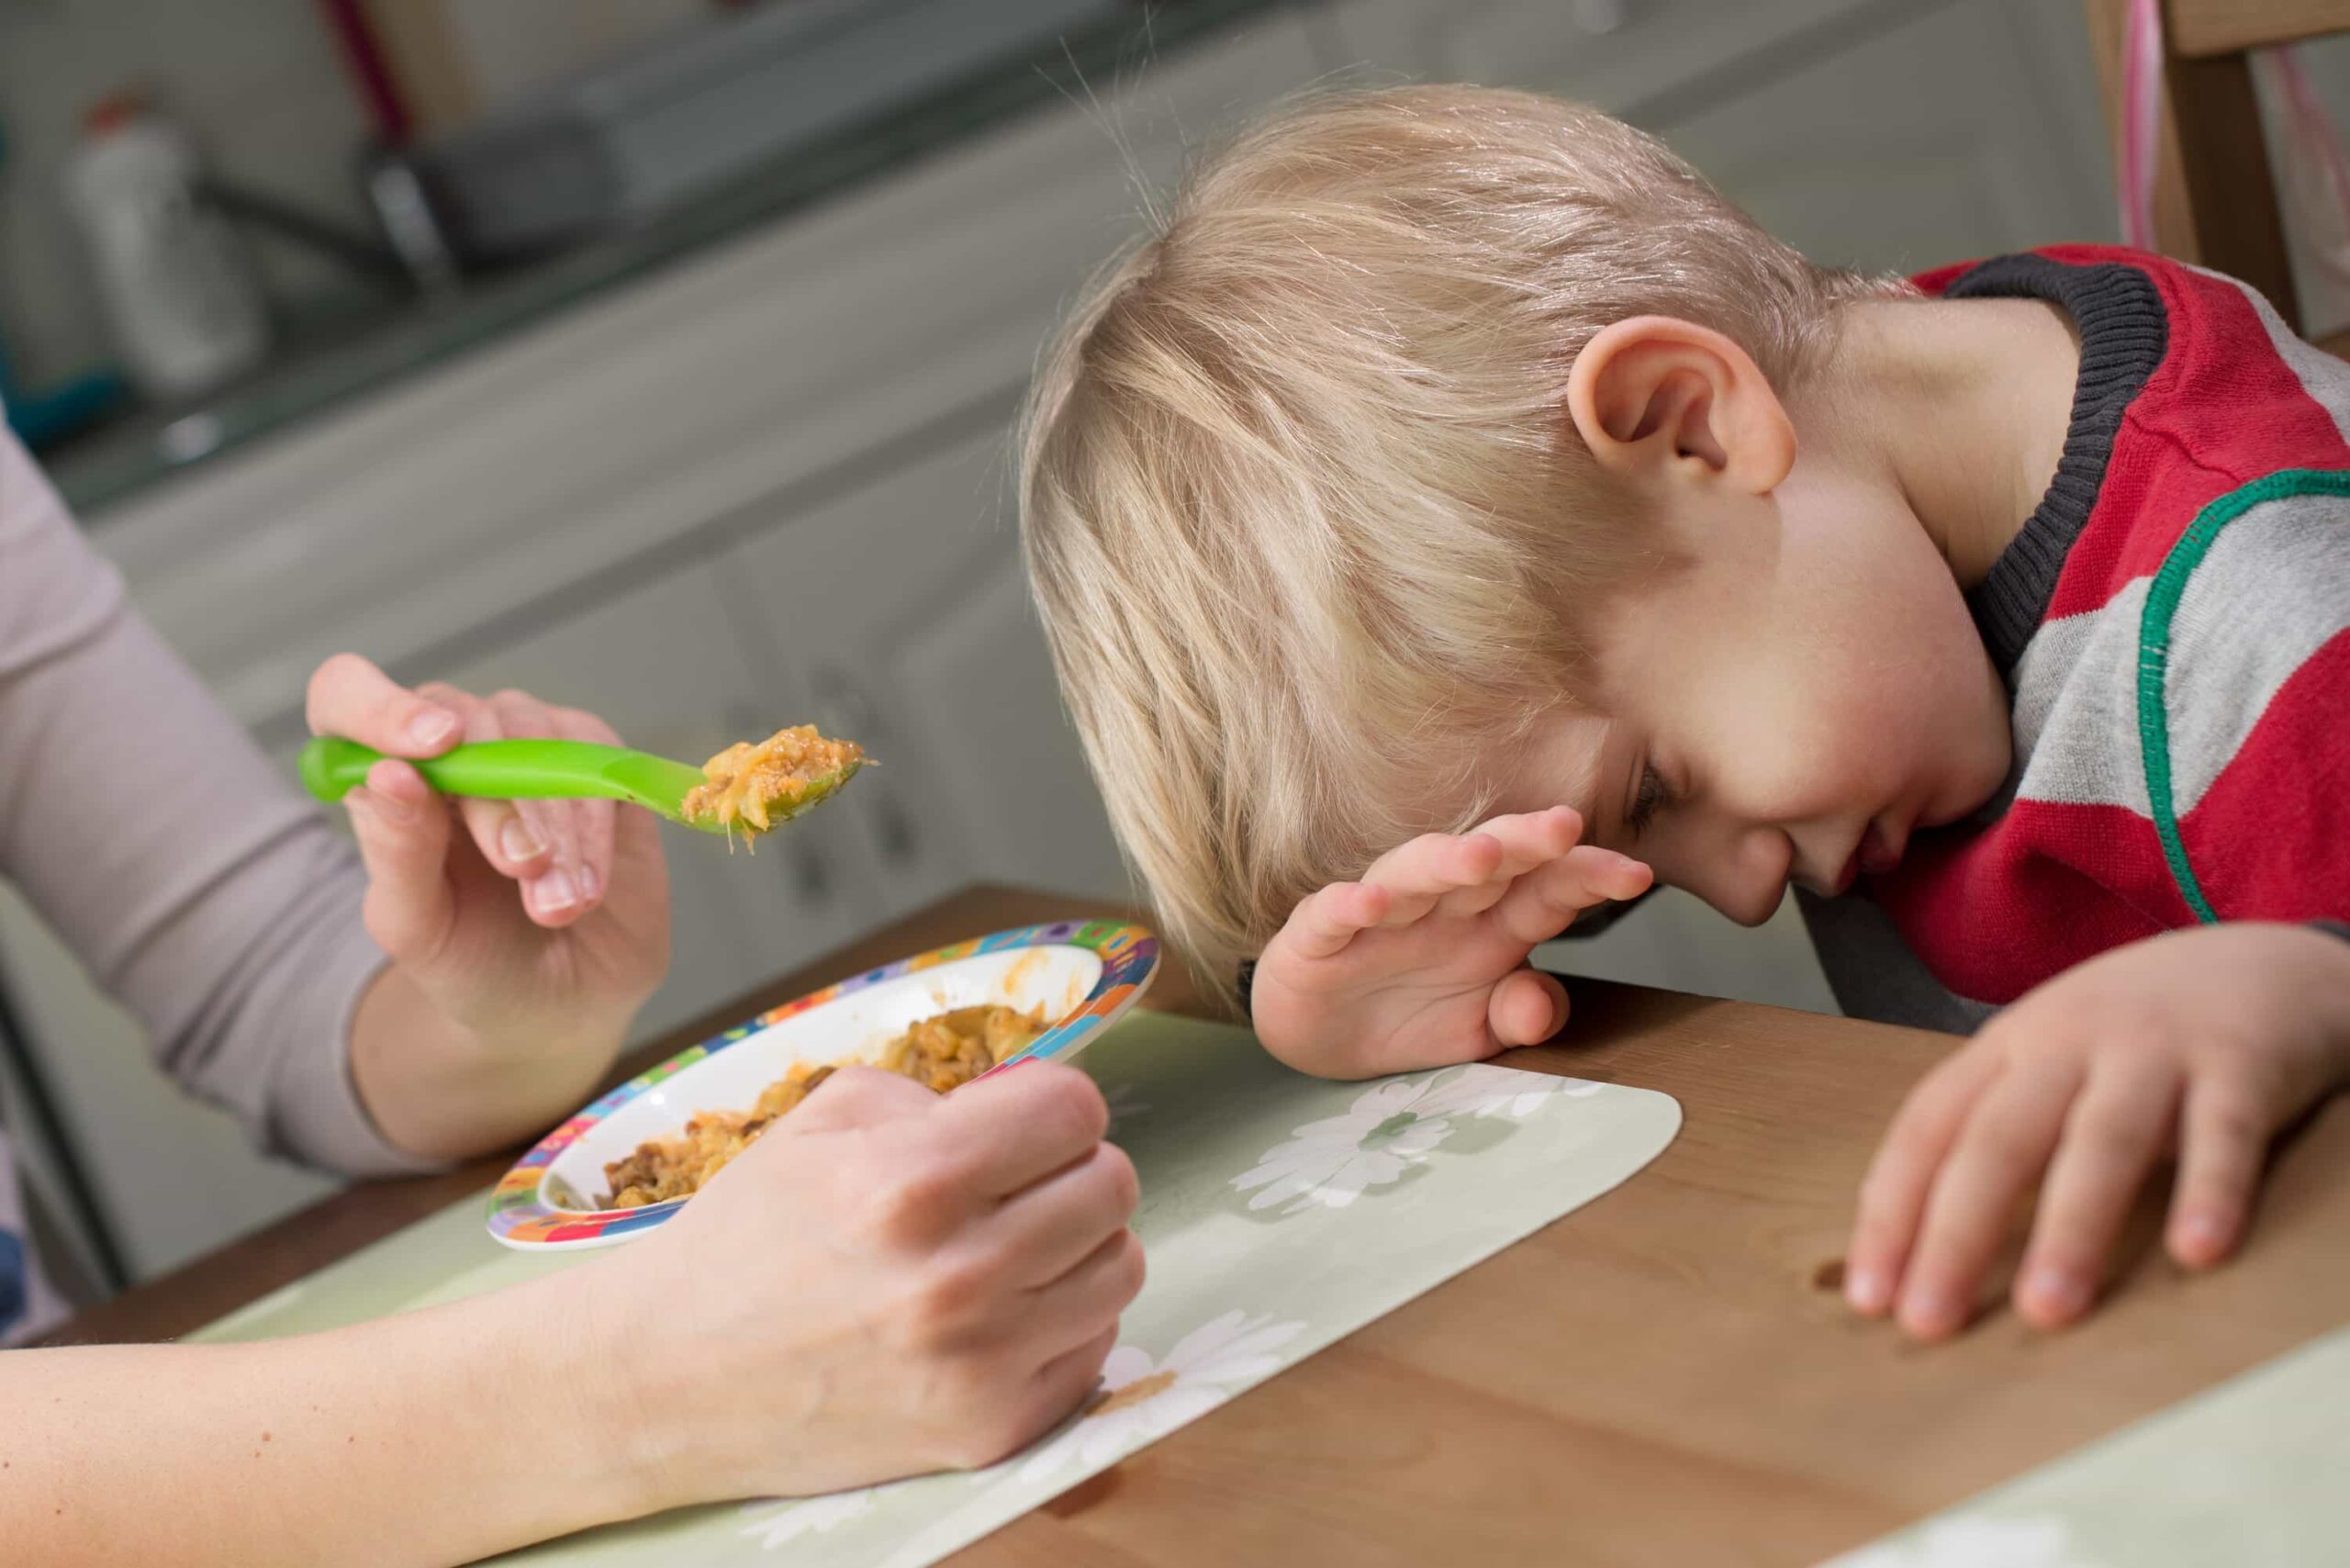 Picky eaters can undermine the best meal planning. Parents can easily get into a rut of serving only a select number of foods their kids will eat. Many resort to bargaining, bribing and coercing just to get their kids to eat a few bites of something healthy. Here, pediatrician Dr. Orlena Kerek outlines how to improve picky eating and establish lifelong healthy eating habits. #healthyeating #pickyeater #pickyeaters #toddlers #parentingtoddlers #healthyeating #healthykids #parenting #positiveparenting #parentingfromtheheart